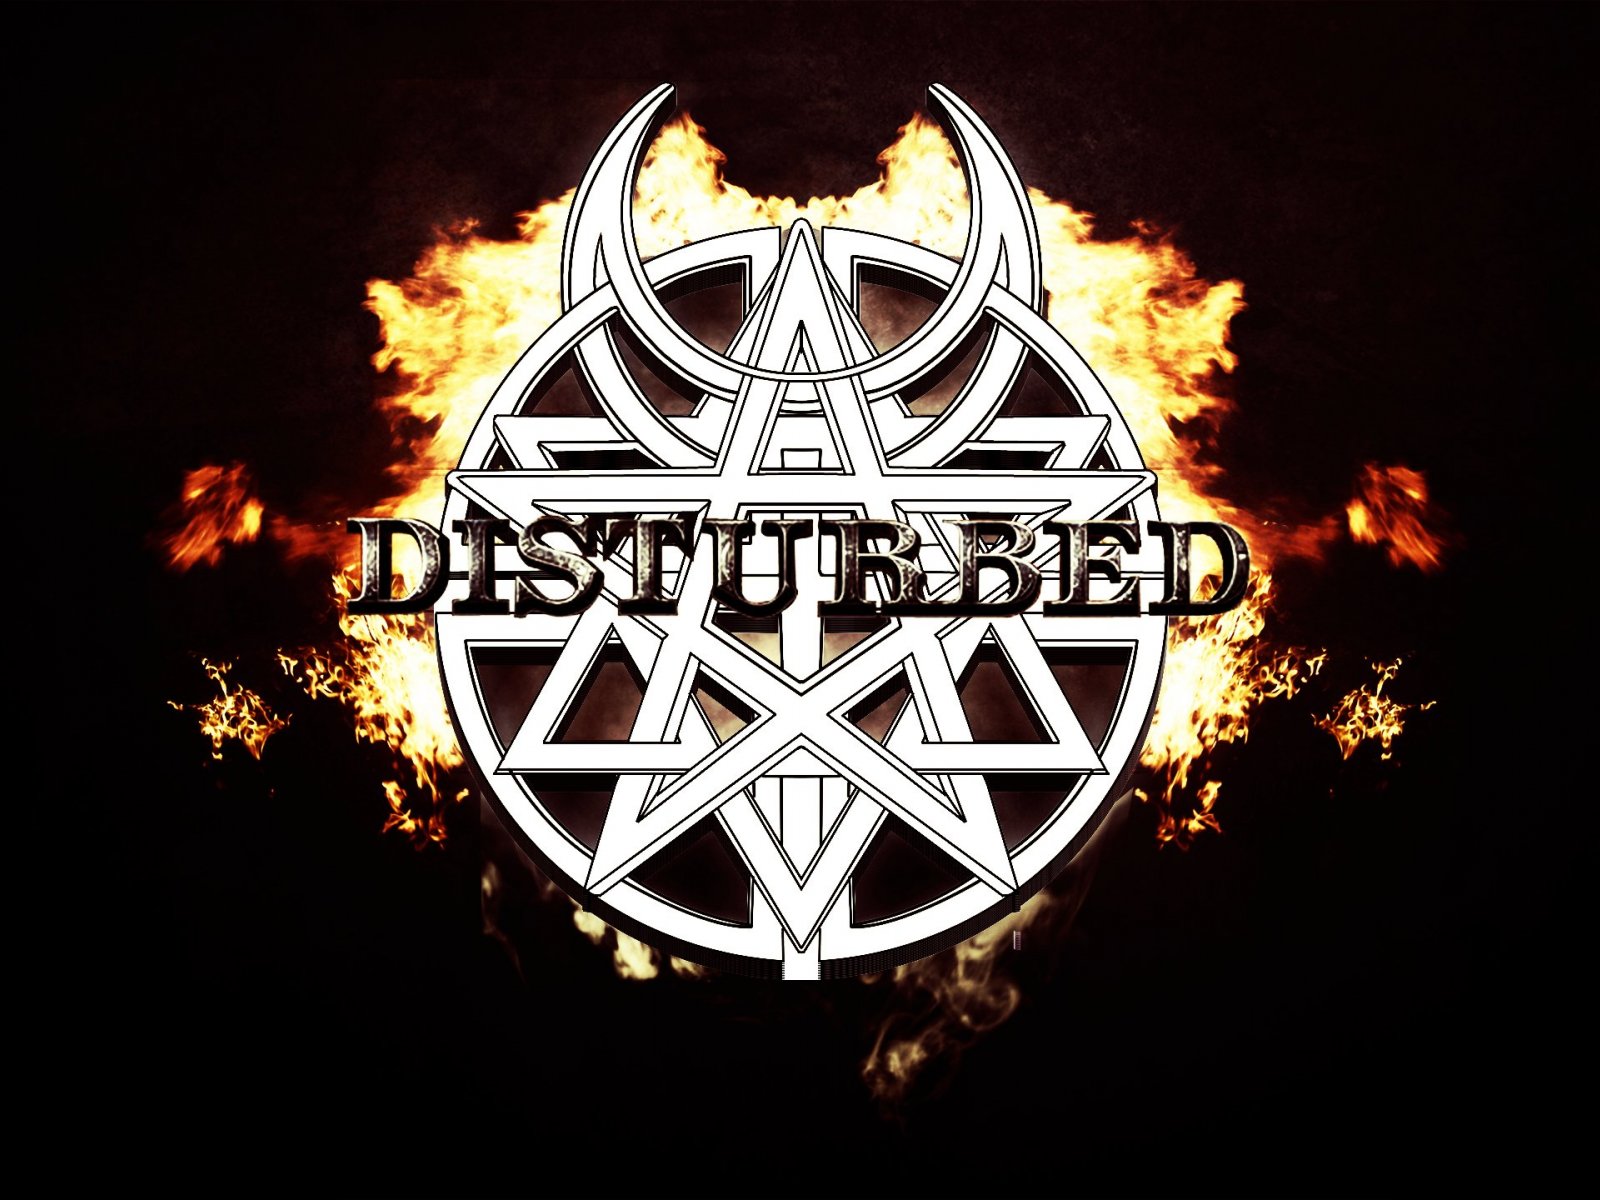 music, disturbed, disturbed (band), heavy metal wallpaper for mobile